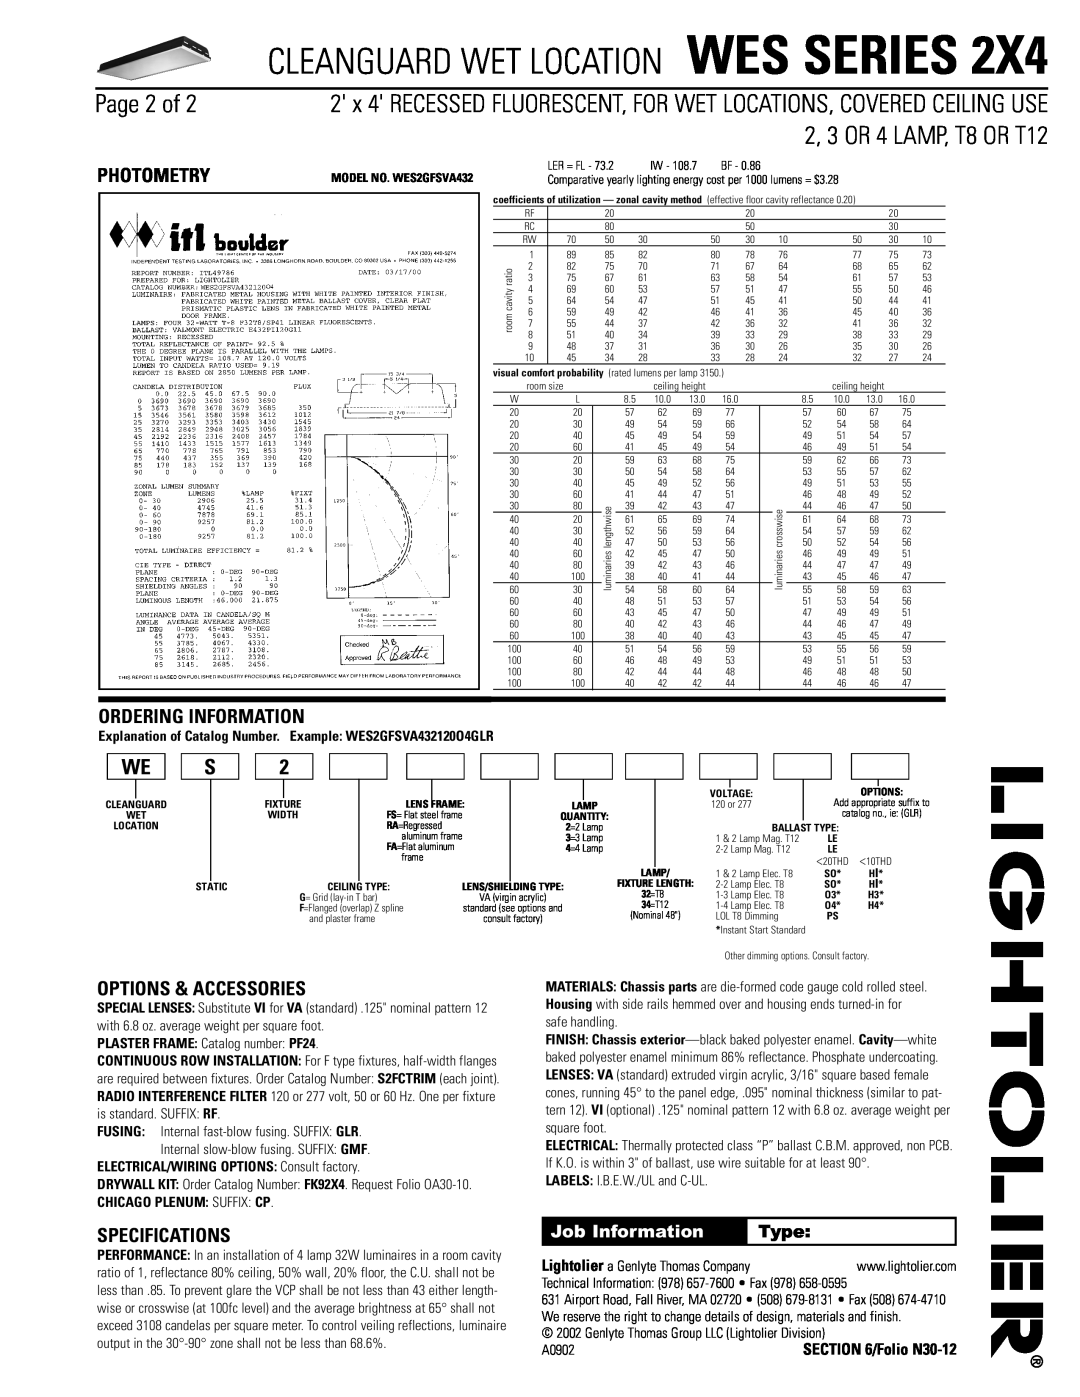 Lightolier WES SERIES 2X4 Page 2 of, Photometry, Ordering Information, Options & Accessories, Specifications, Type, Static 